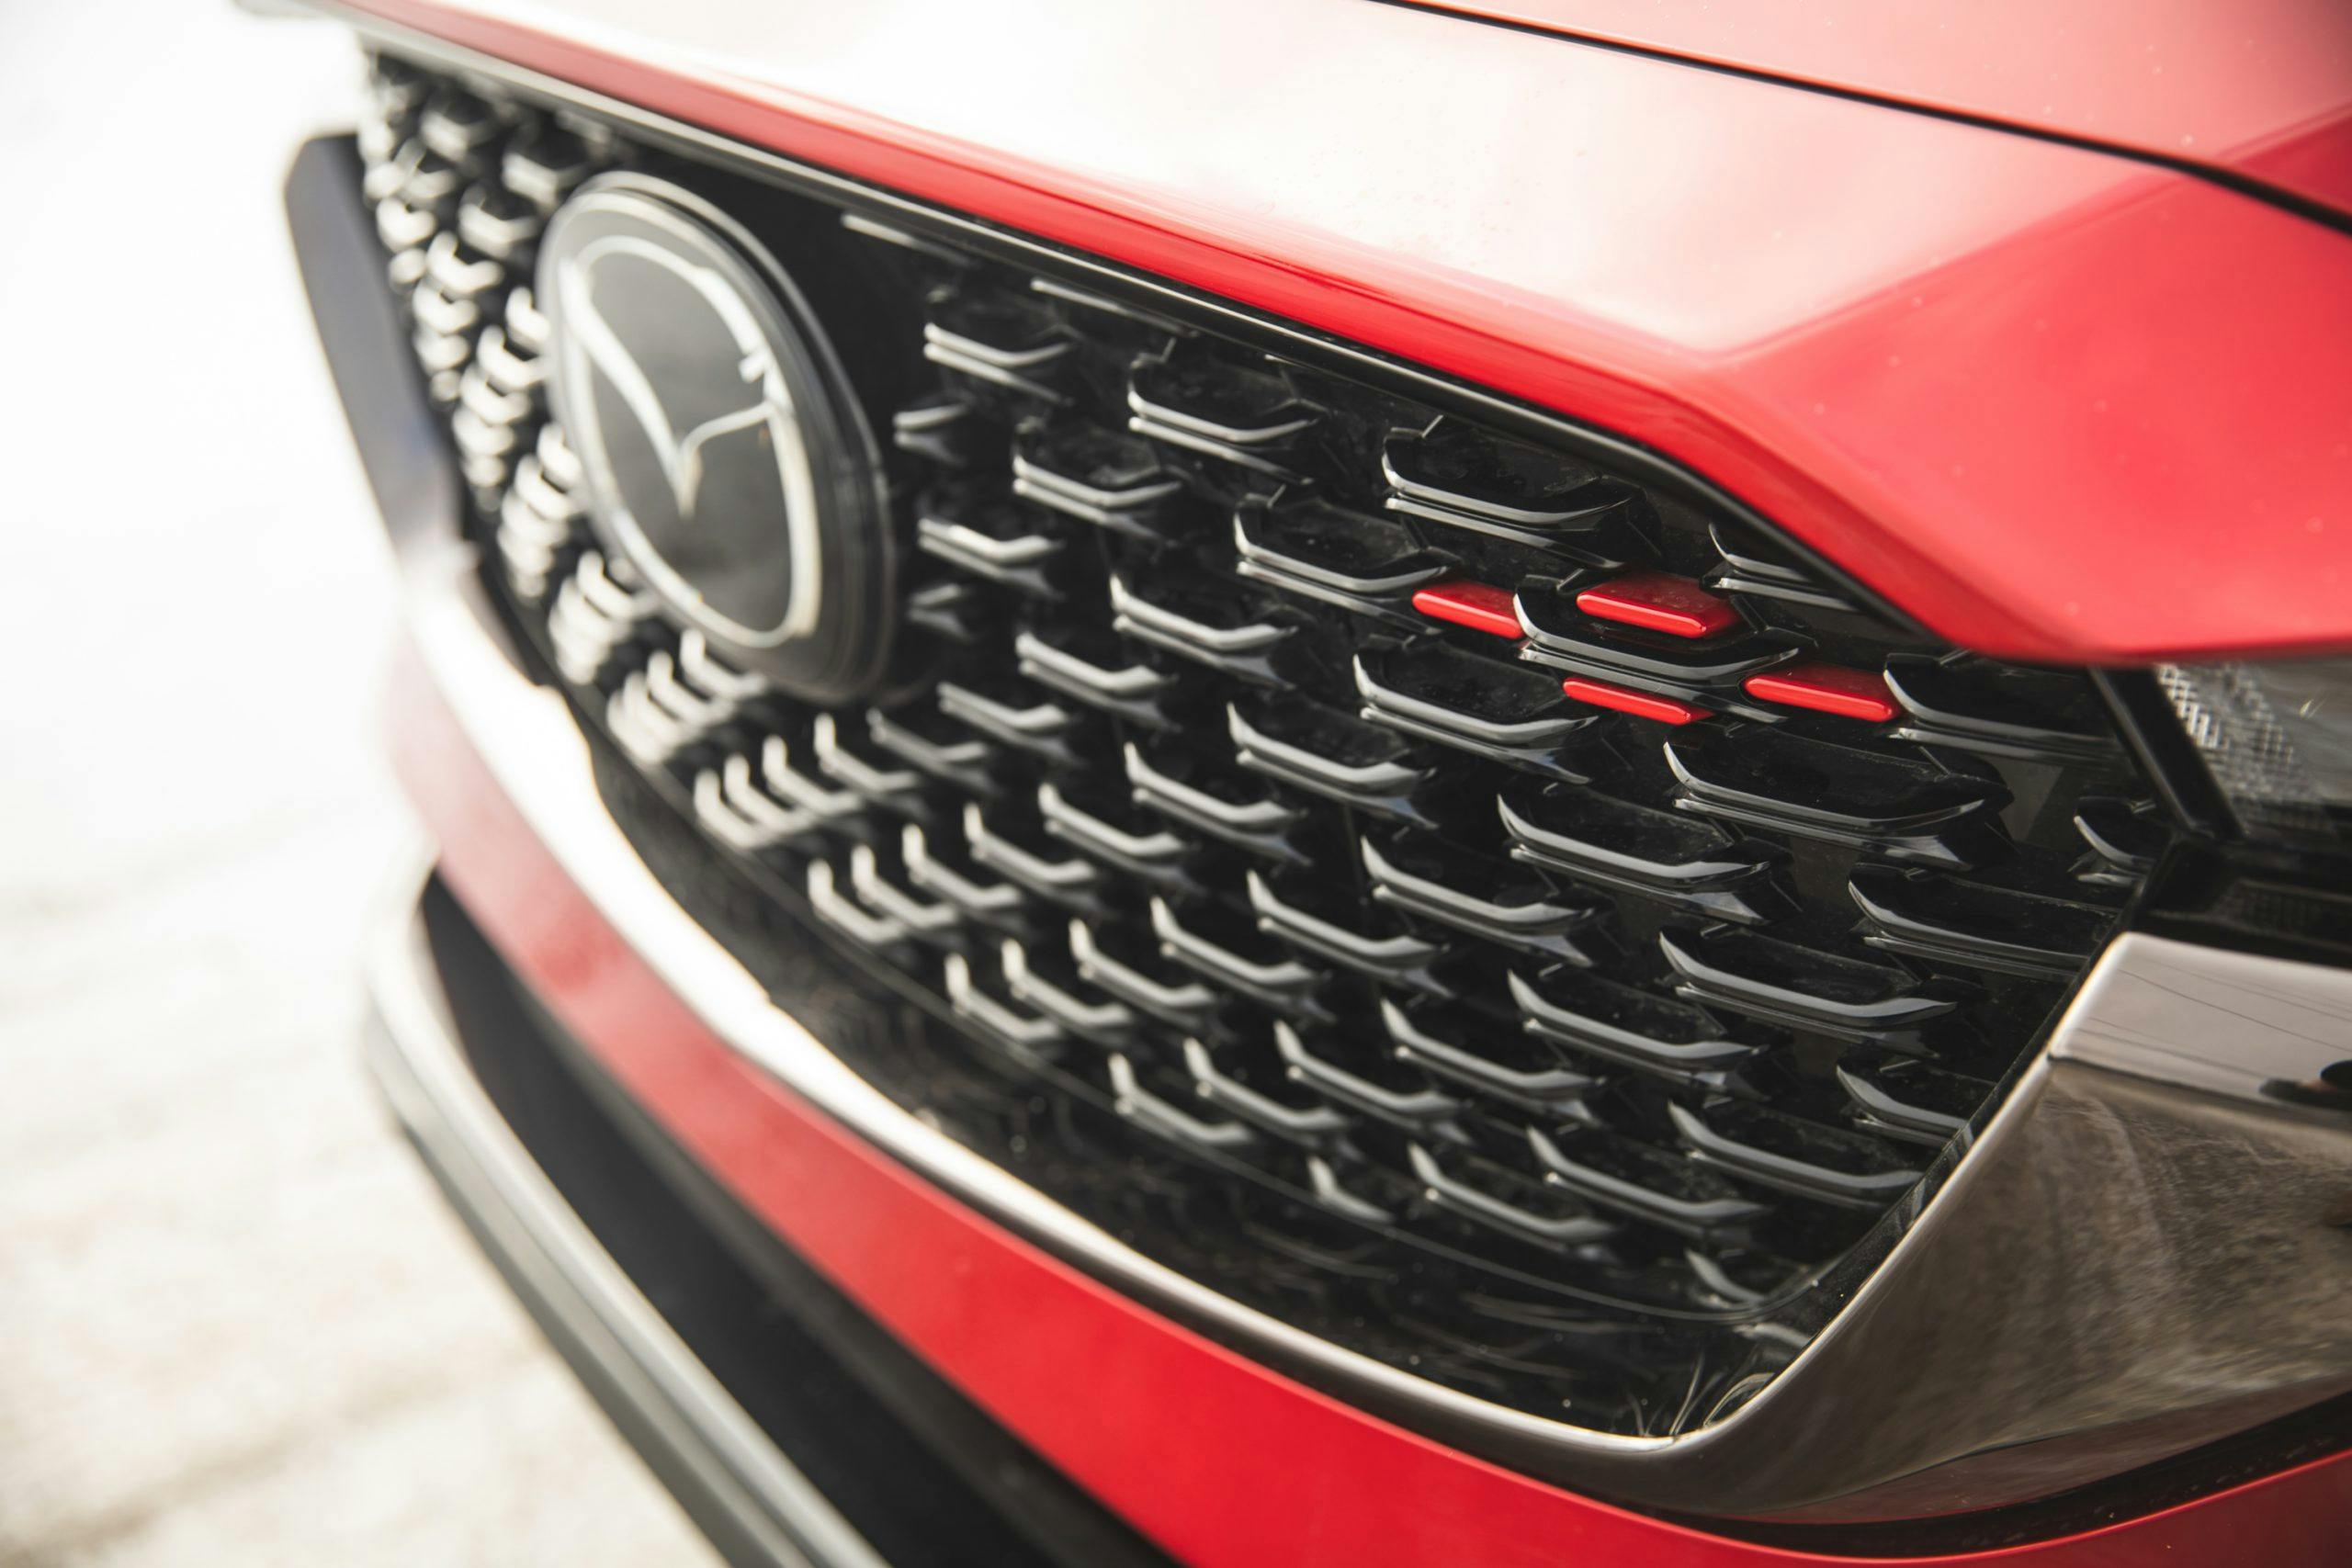 2022 Mazda CX-5 Turbo AWD front grille detail